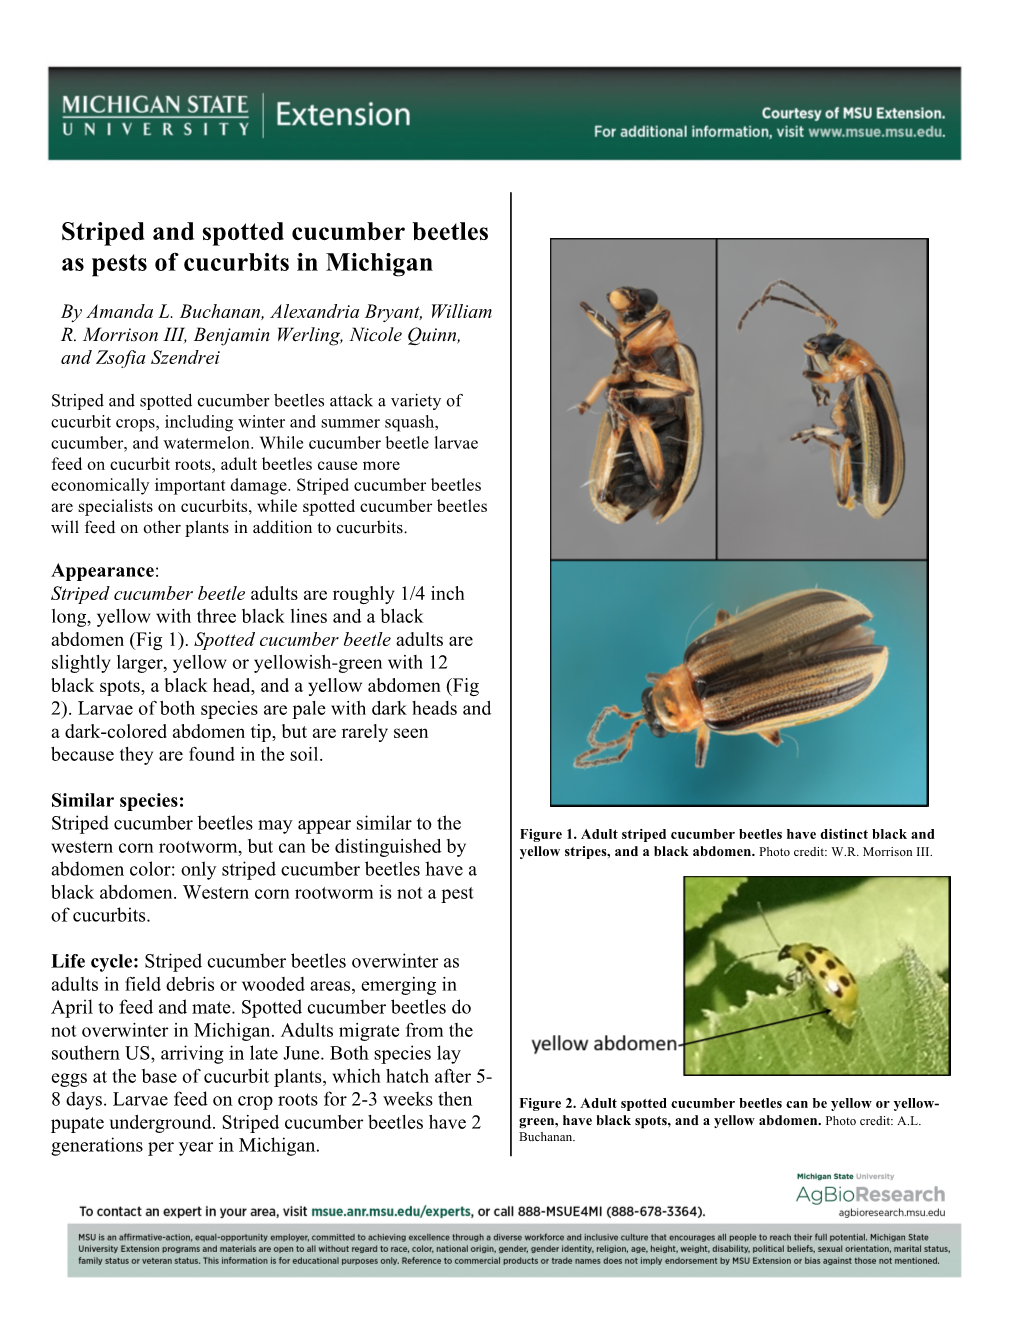 Striped and Spotted Cucumber Beetles As Pests of Cucurbits in Michigan